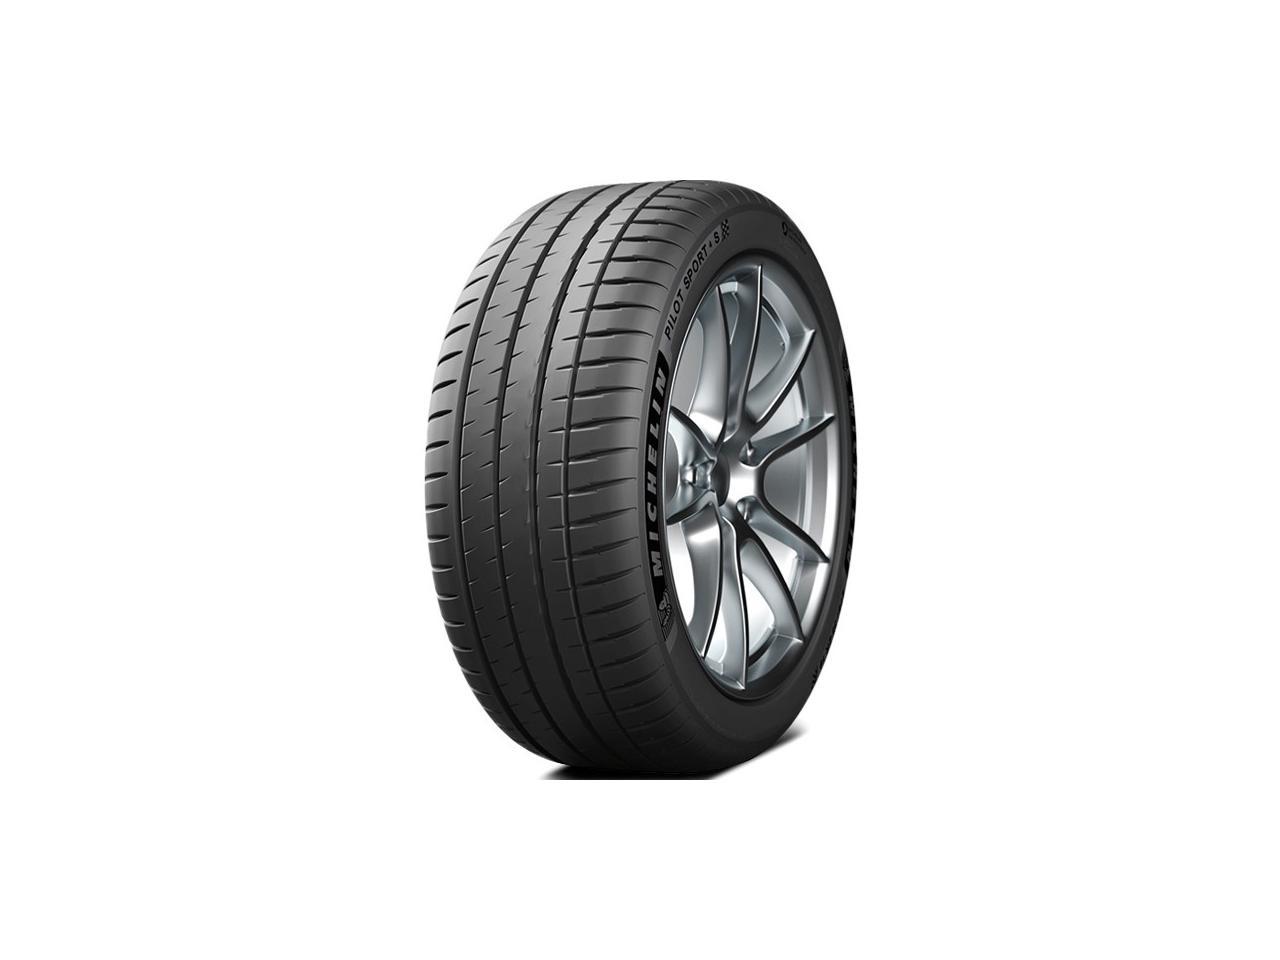 1 Michelin Pilot Sport 4S 295/25R21 96Y Max Performance Summer Tires ...